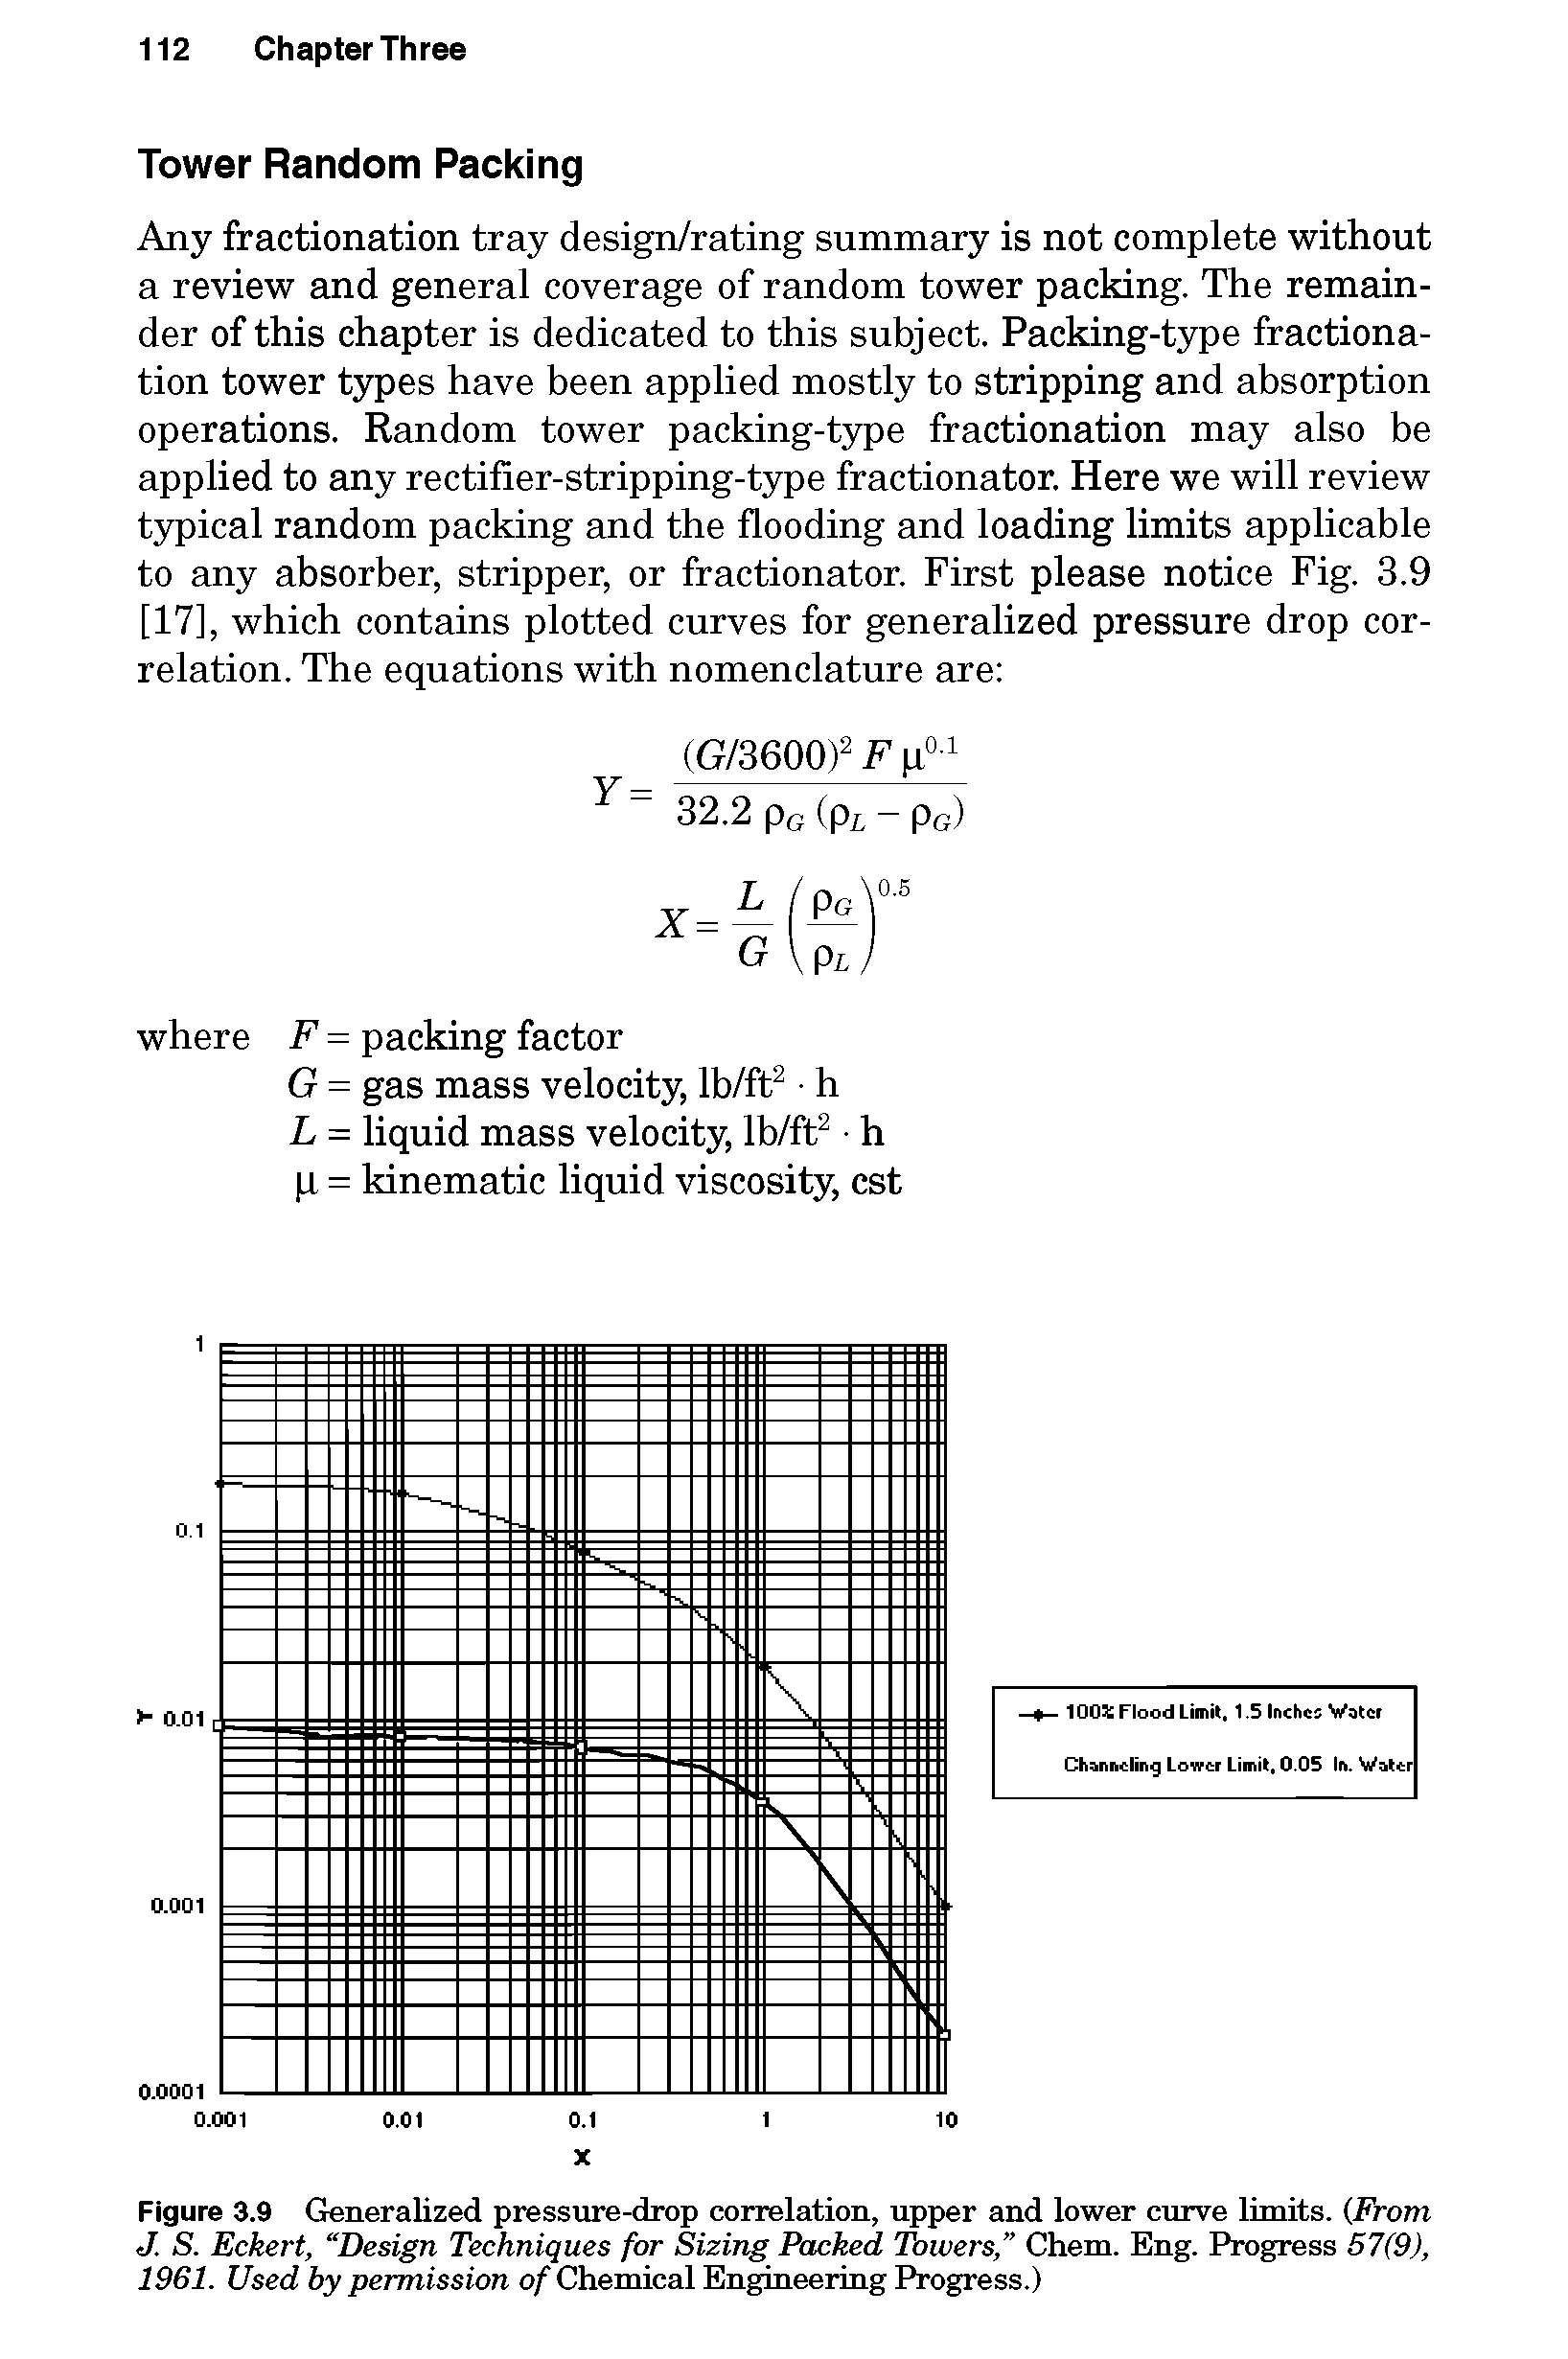 Figure 3.9 Generalized pressure-drop correlation, upper and lower curve limits. (From J. S. Eckert, Design Techniques for Sizing Packed Towers, Chem. Eng. Progress 57(9), 1961. Used by permission of Chemical Engineering Progress.)...